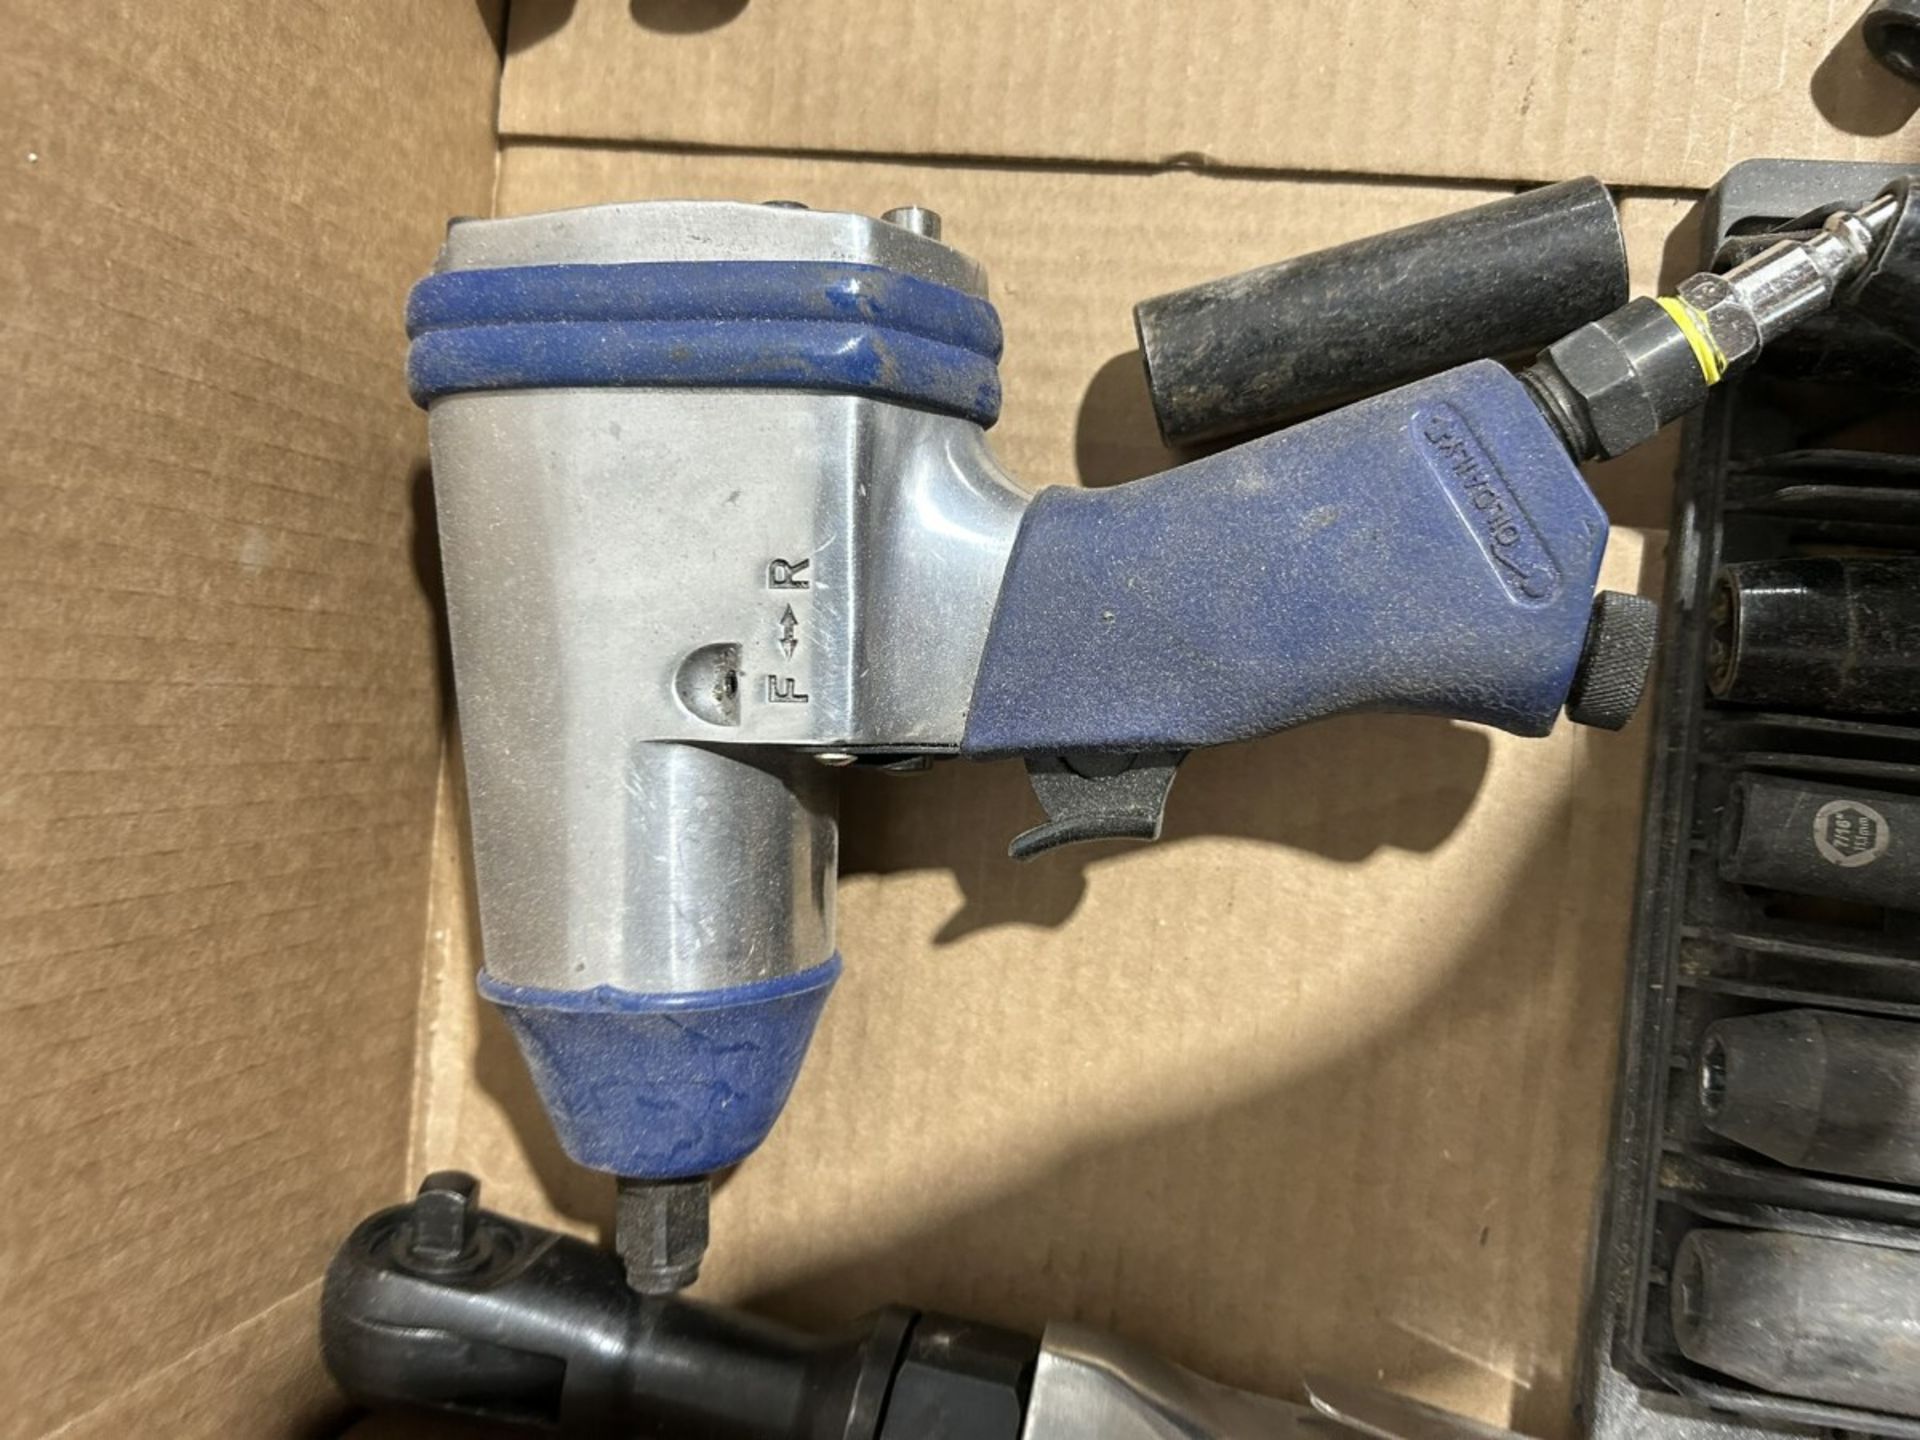 PNEUMATIC 1/2" IMPACT WRENCH, 3/8" RATCHET, DRILL, AND ASSORTED IMPACT SOCKETS - Image 2 of 9